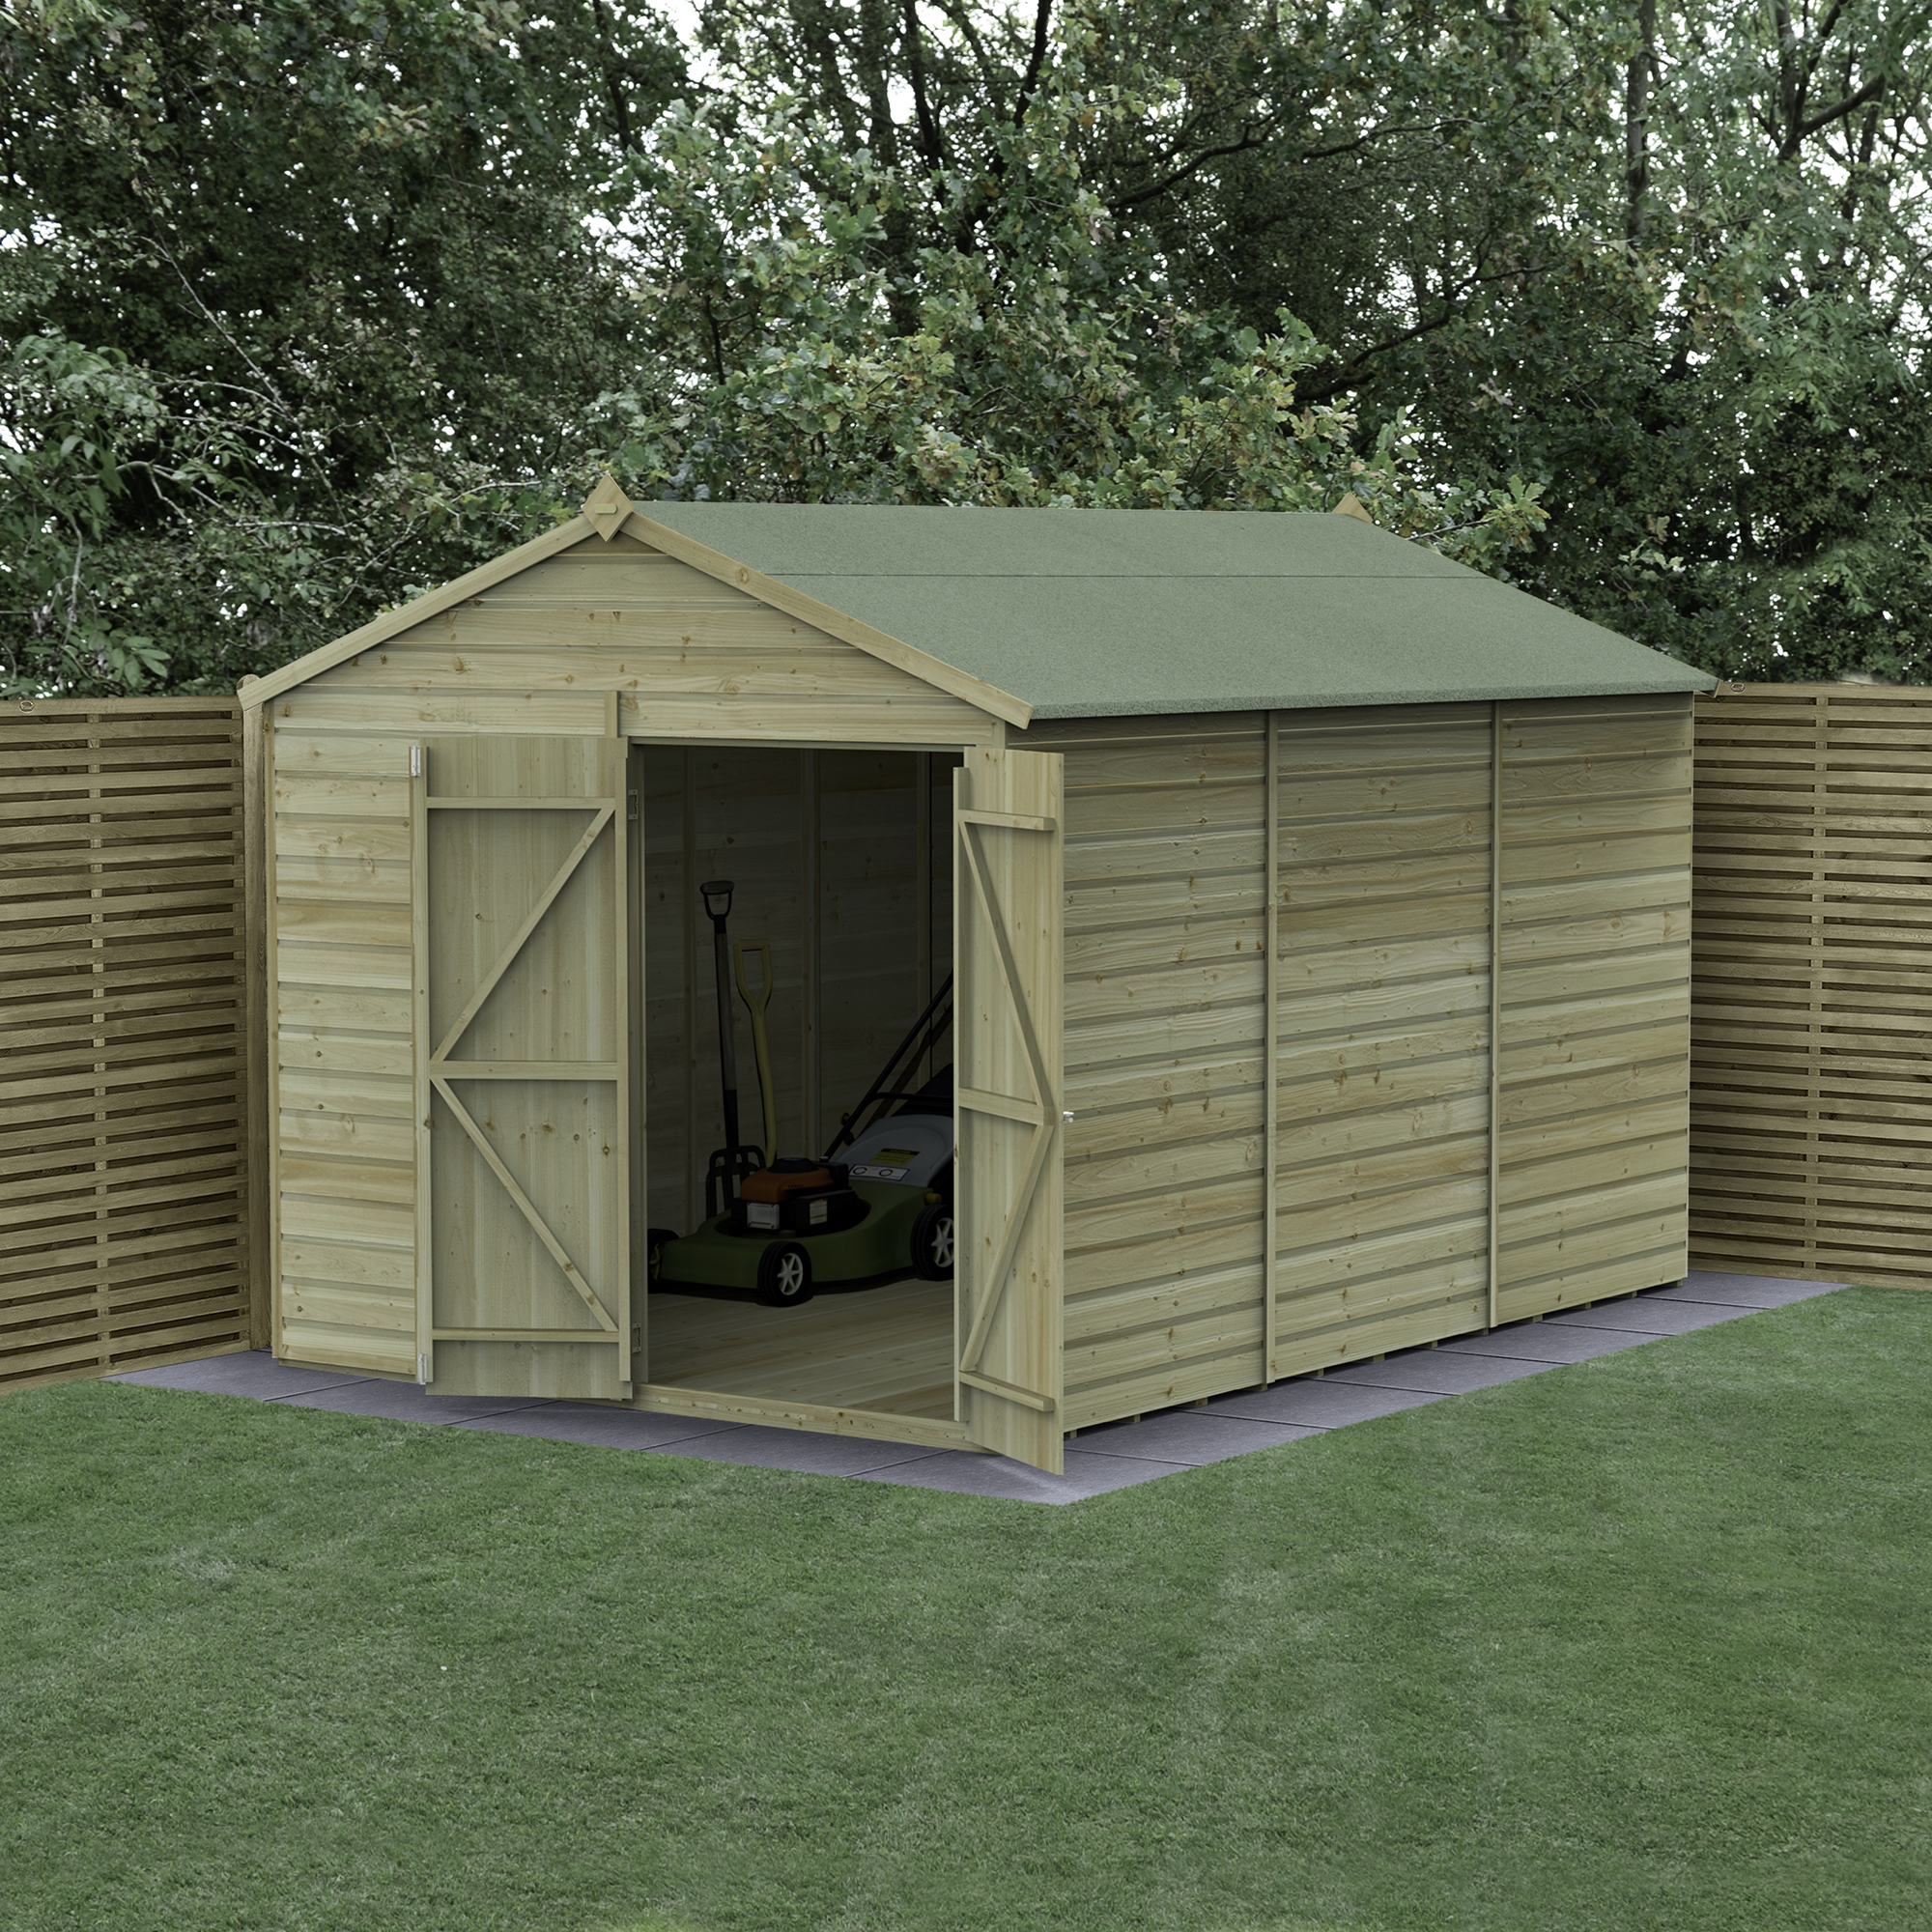 Forest Garden Beckwood 8 x 12ft Apex Shiplap Pressure Treated Double Door Windowless Shed